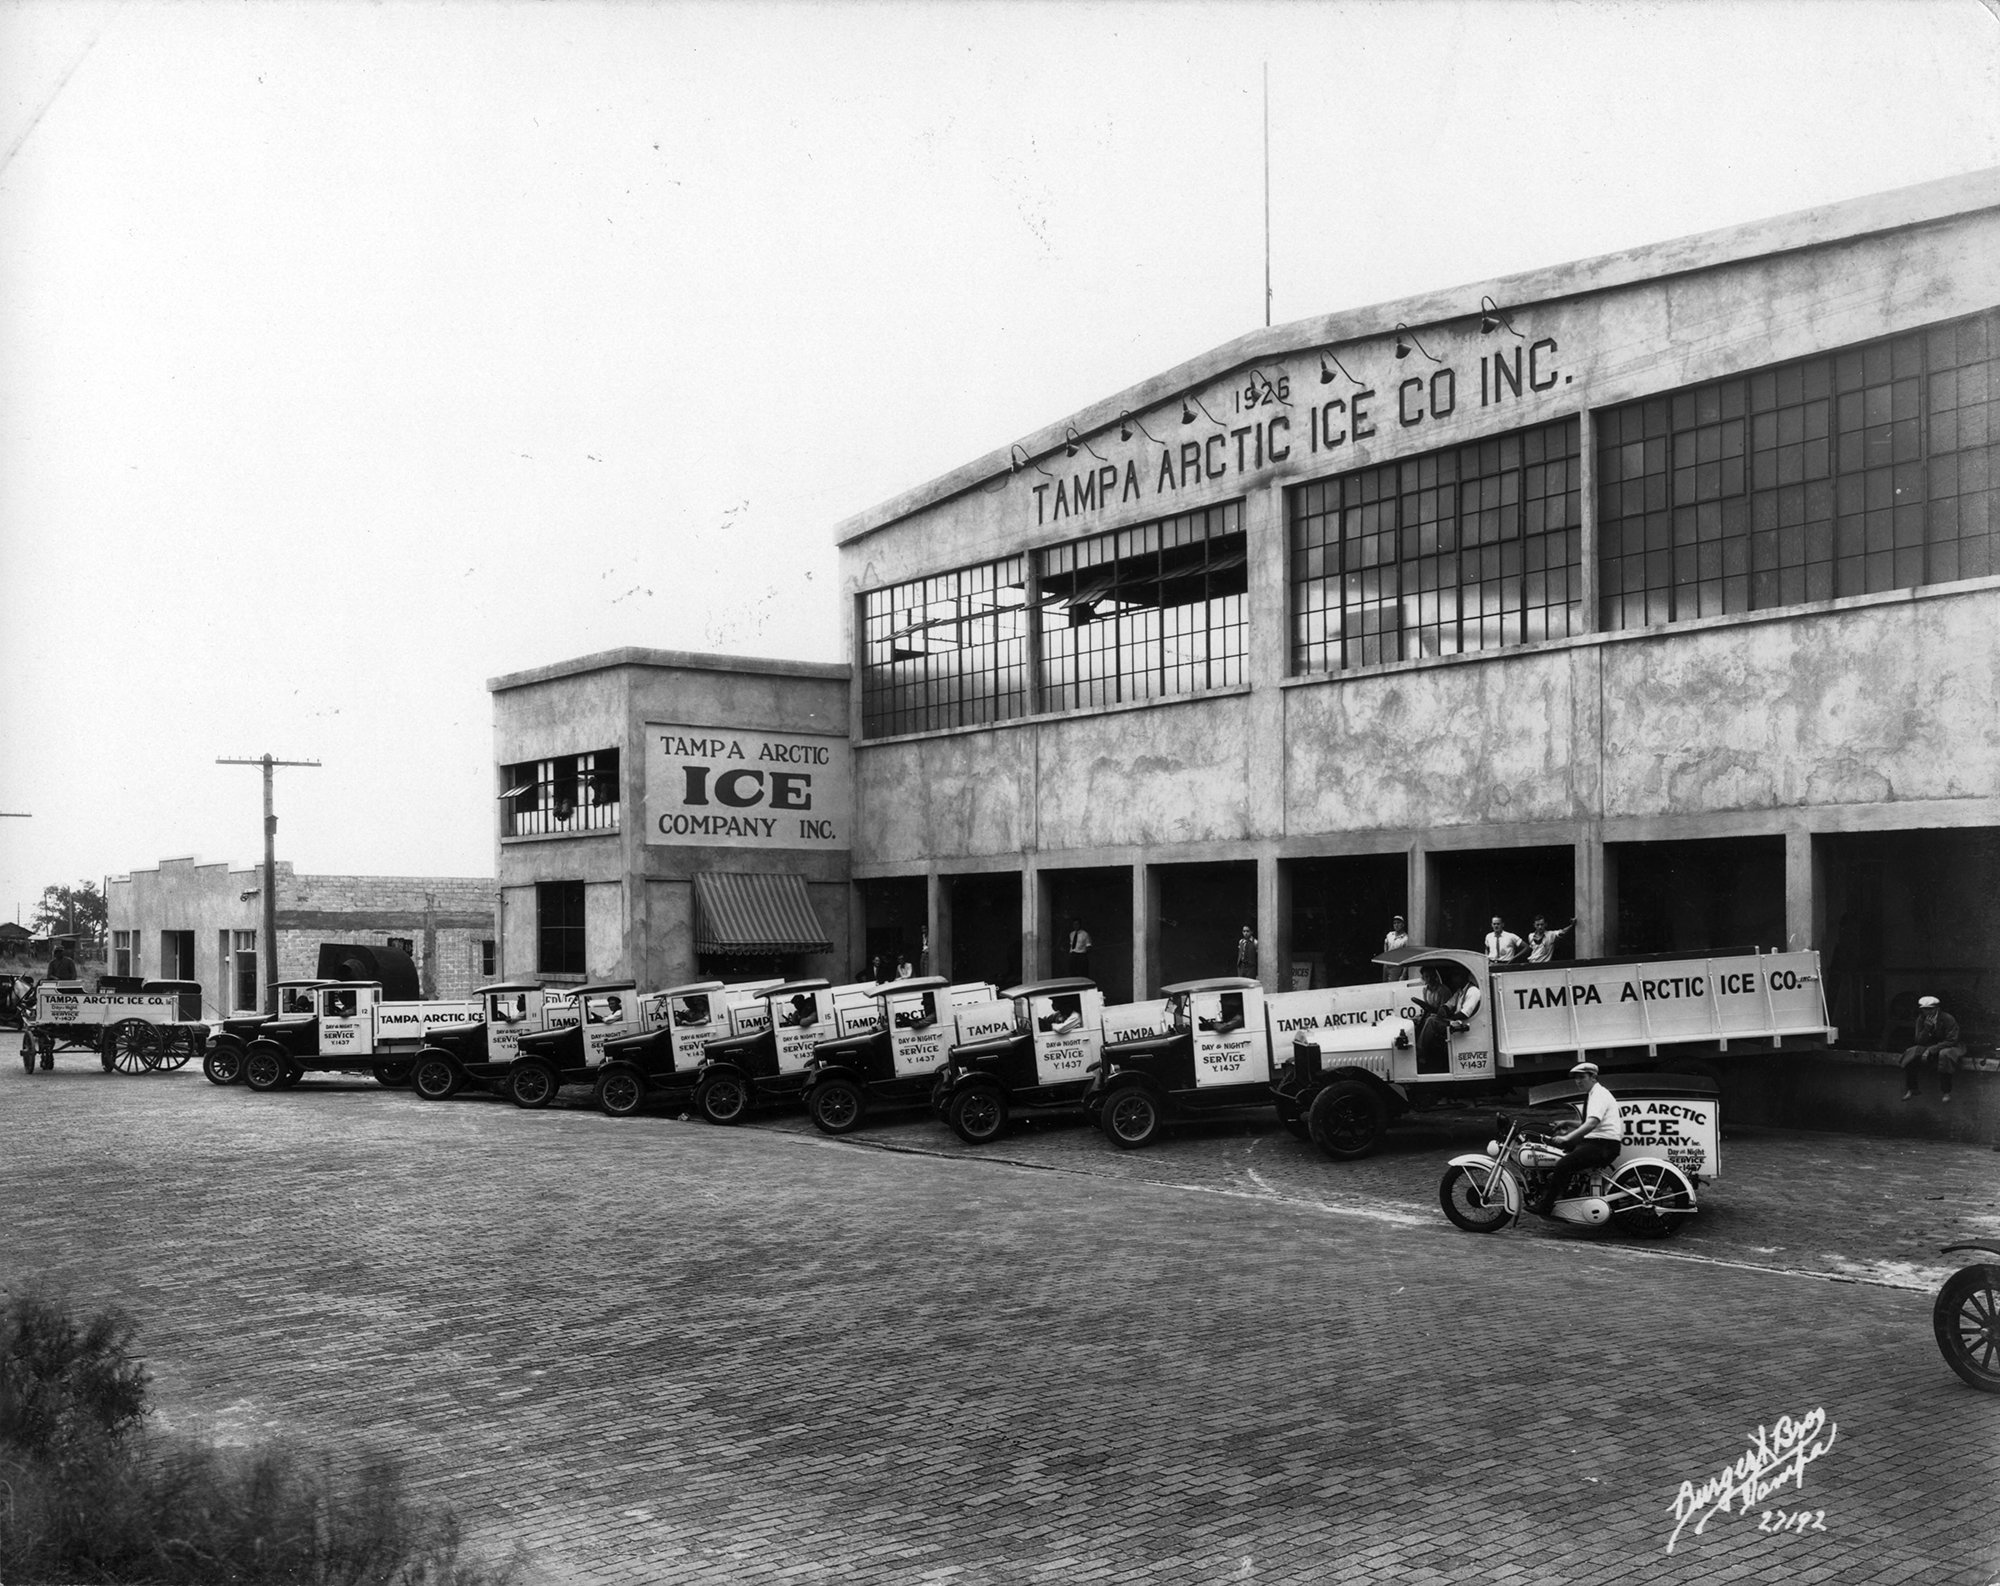 Delivery-Trucks-At-The-Tampa-Arctic-Ice-Company-Inc.-1402-2nd-Ave-rev.jpg